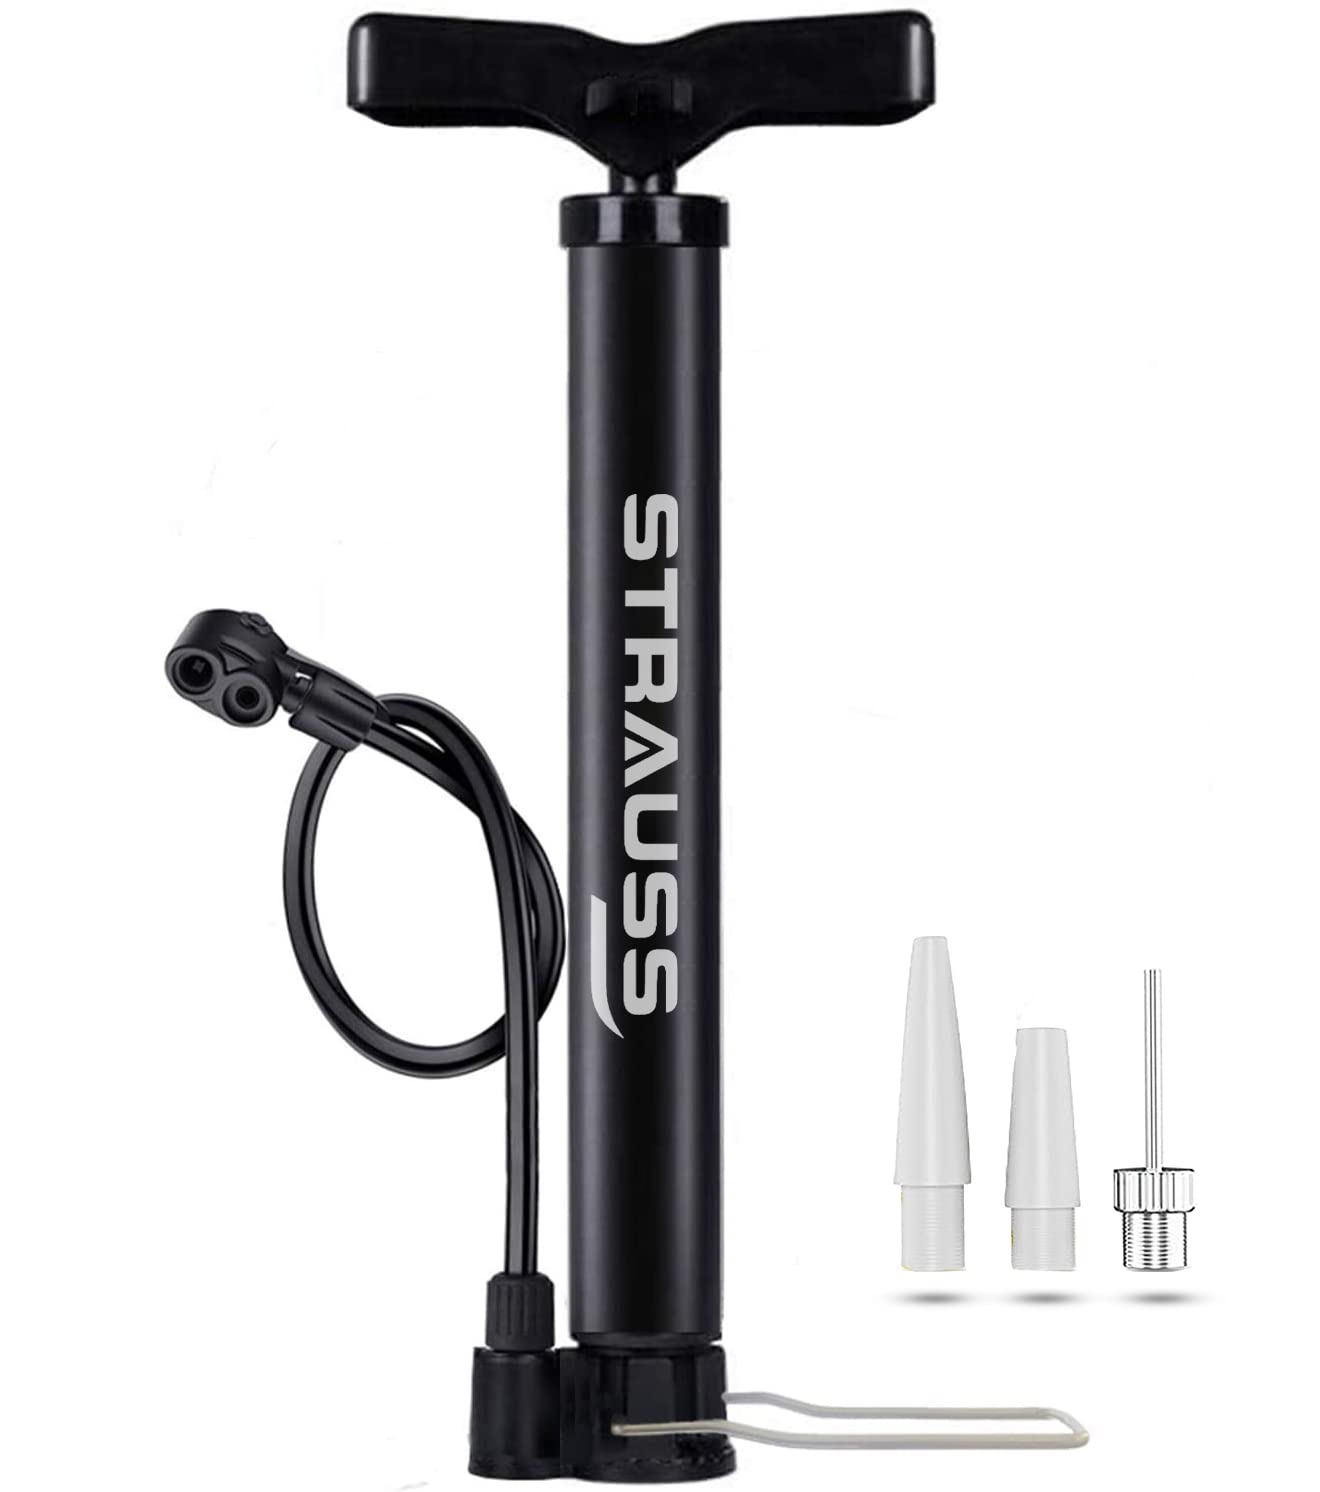 Strauss Bicycle Air Pump with Needle & Dual Valve | Portable Pump with 2 Modes, Ideal for Inflating Bicycle, Swimming Rings | Sturdy Base & Ergonomic Handle (Navy Blue)